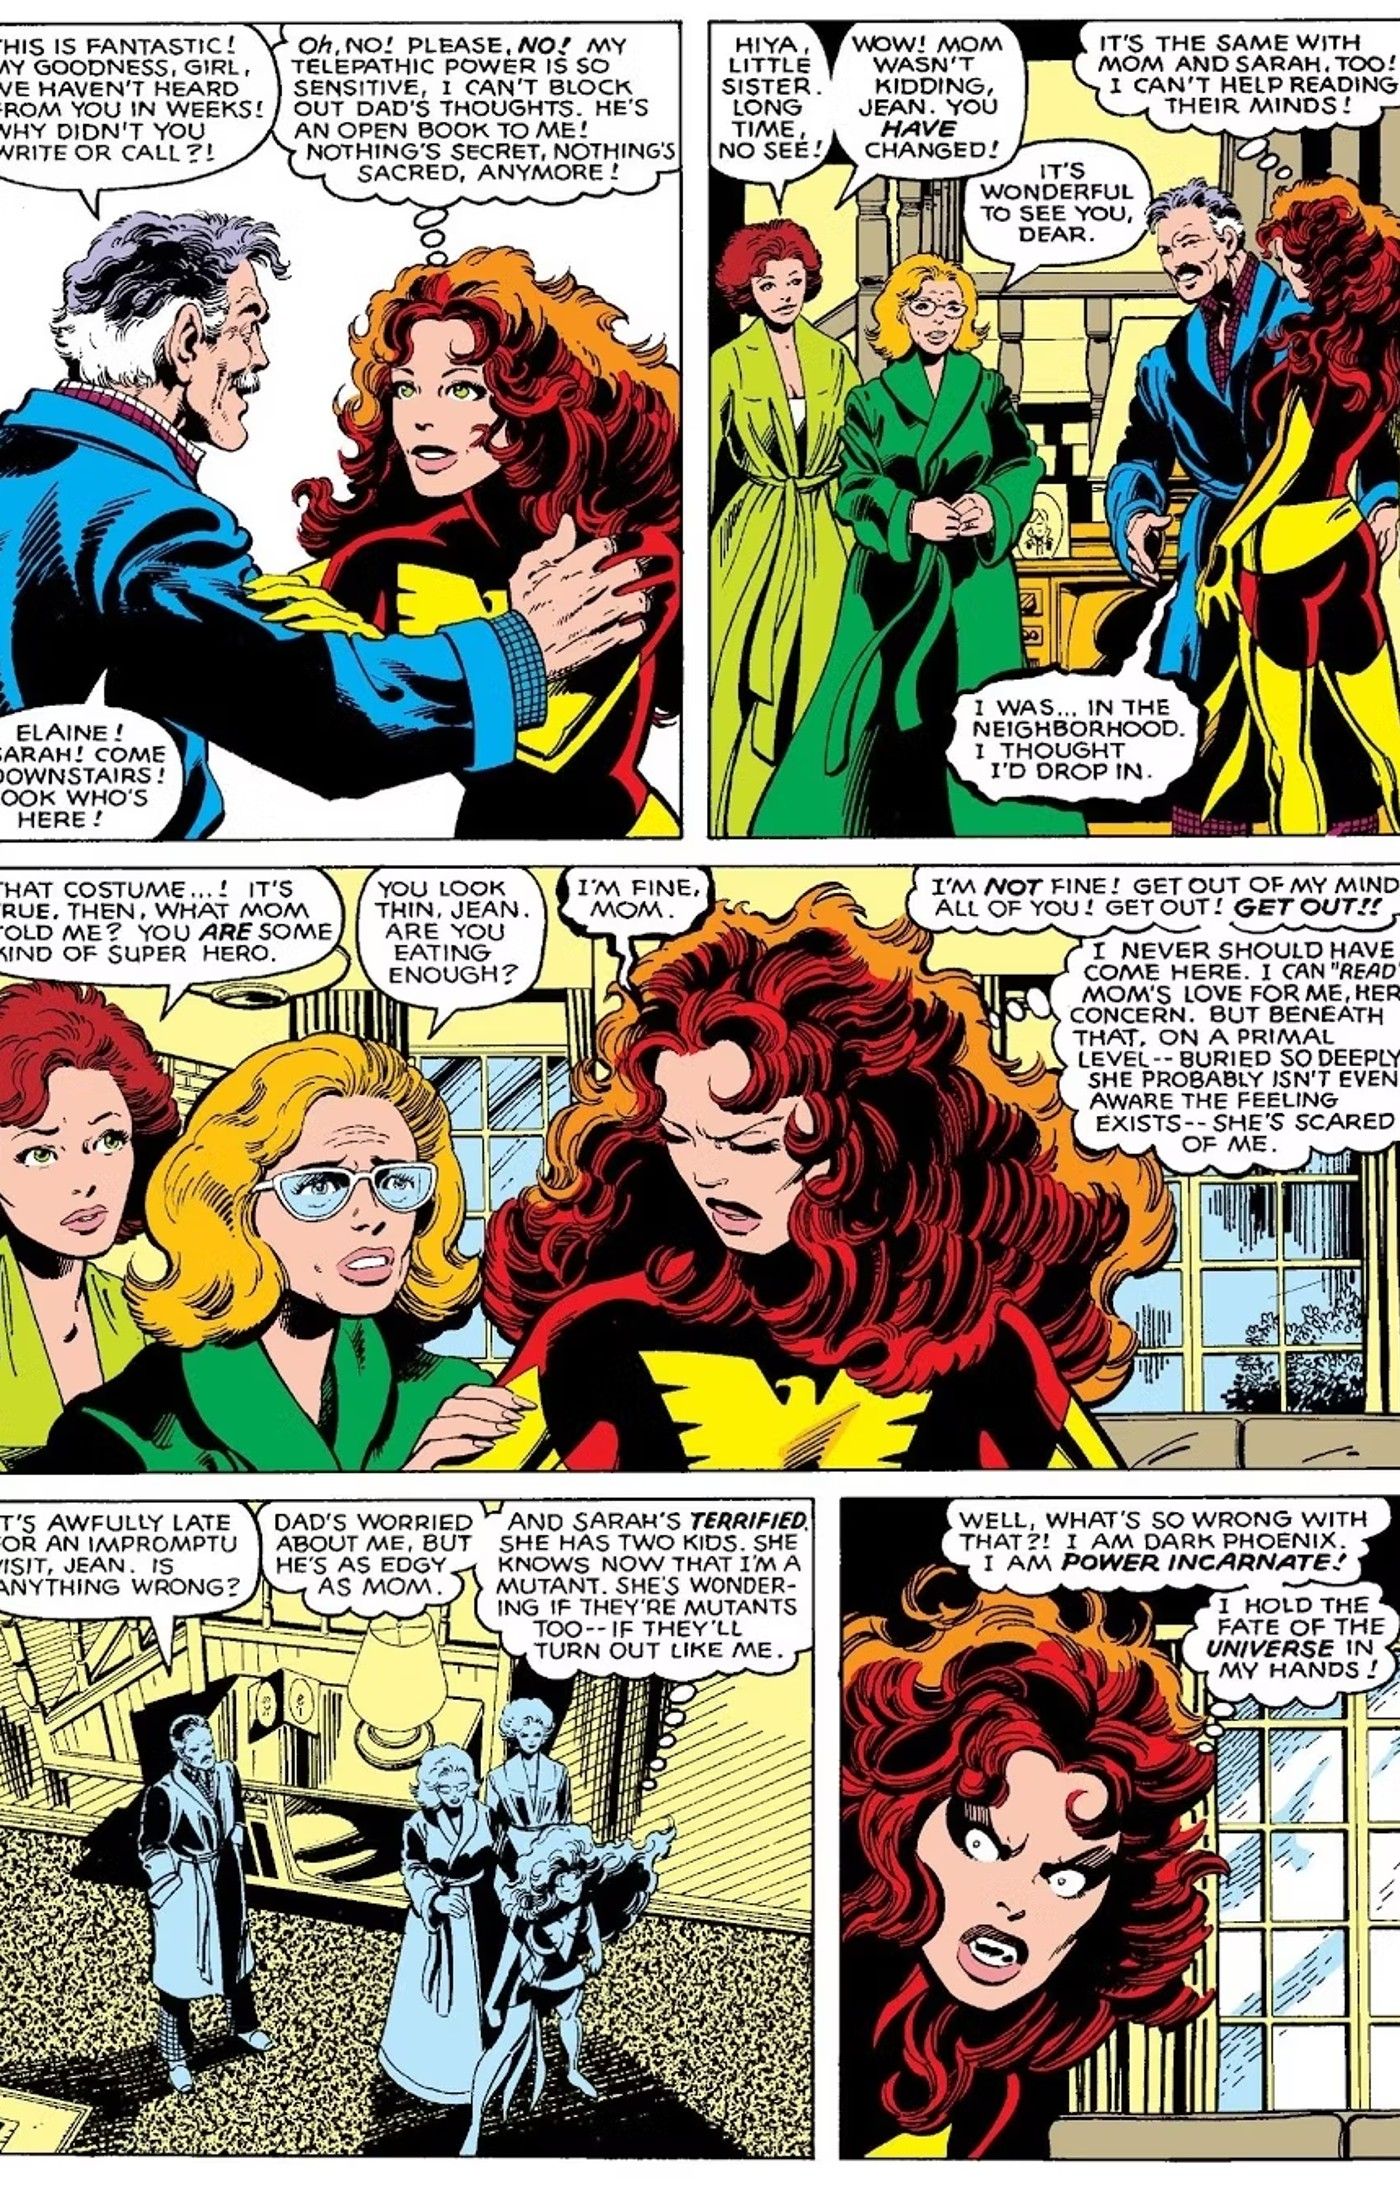 40 Years of X-Men Lore Were Almost Radically Altered By Replacing This Original Member With Their Sibling